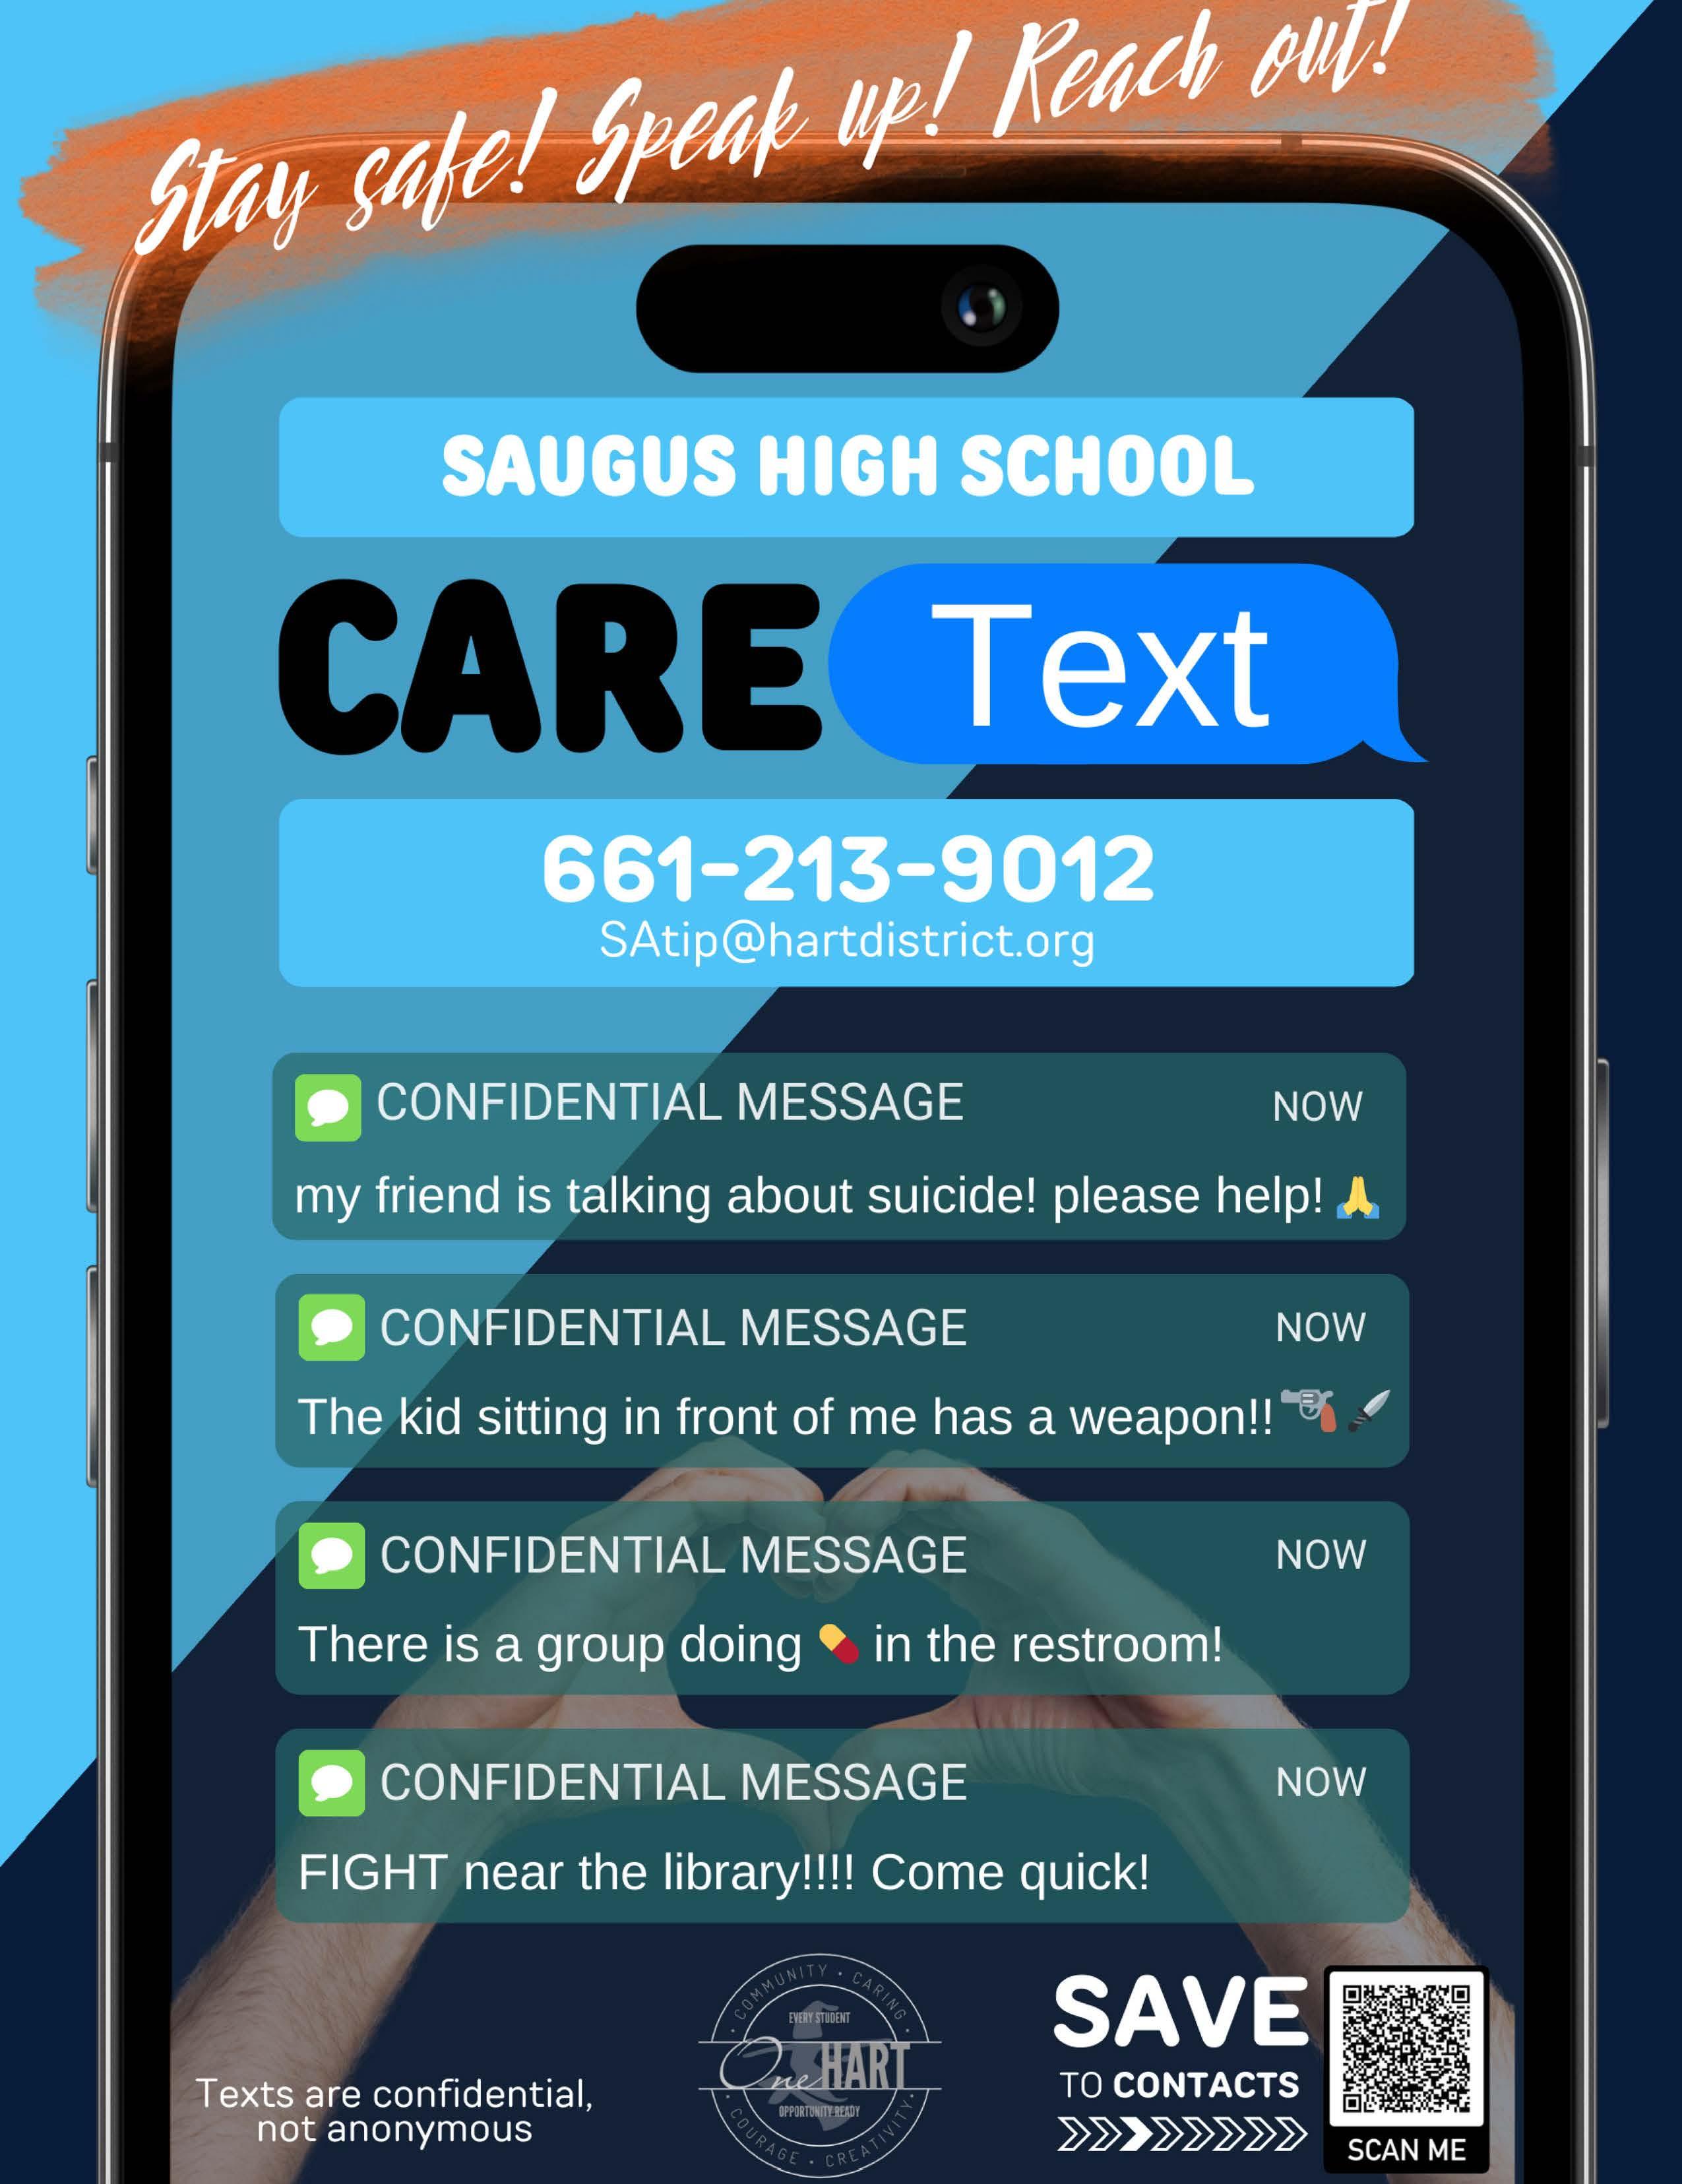 Saugus CARE Text Message phone number image